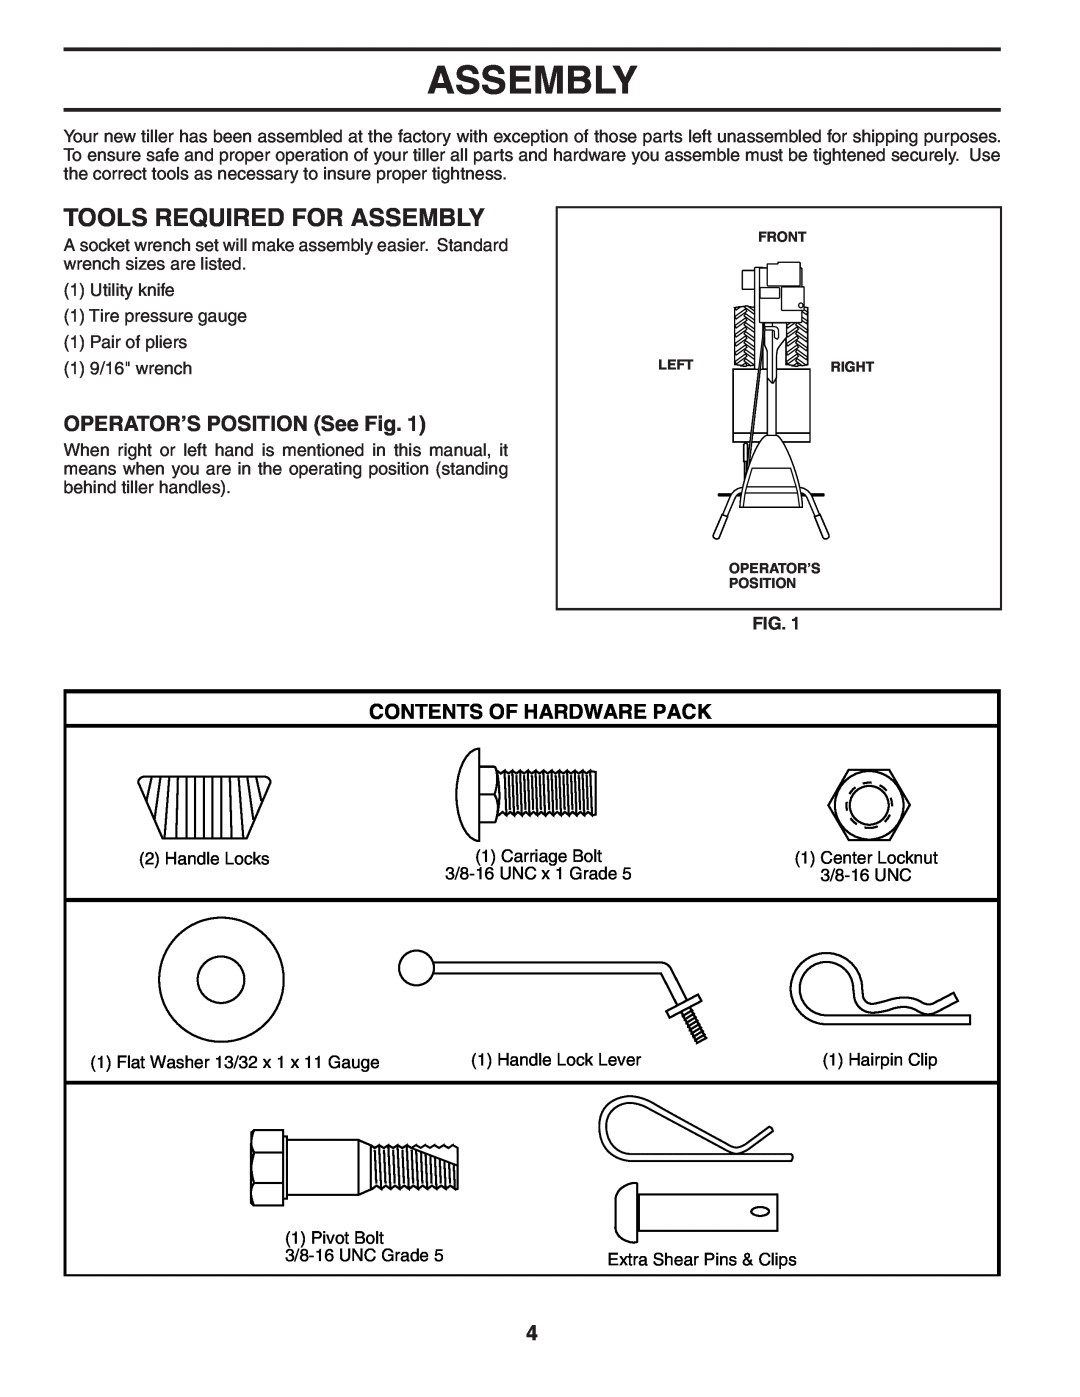 Husqvarna 650CRT owner manual Tools Required For Assembly, OPERATOR’S POSITION See Fig, Contents Of Hardware Pack 